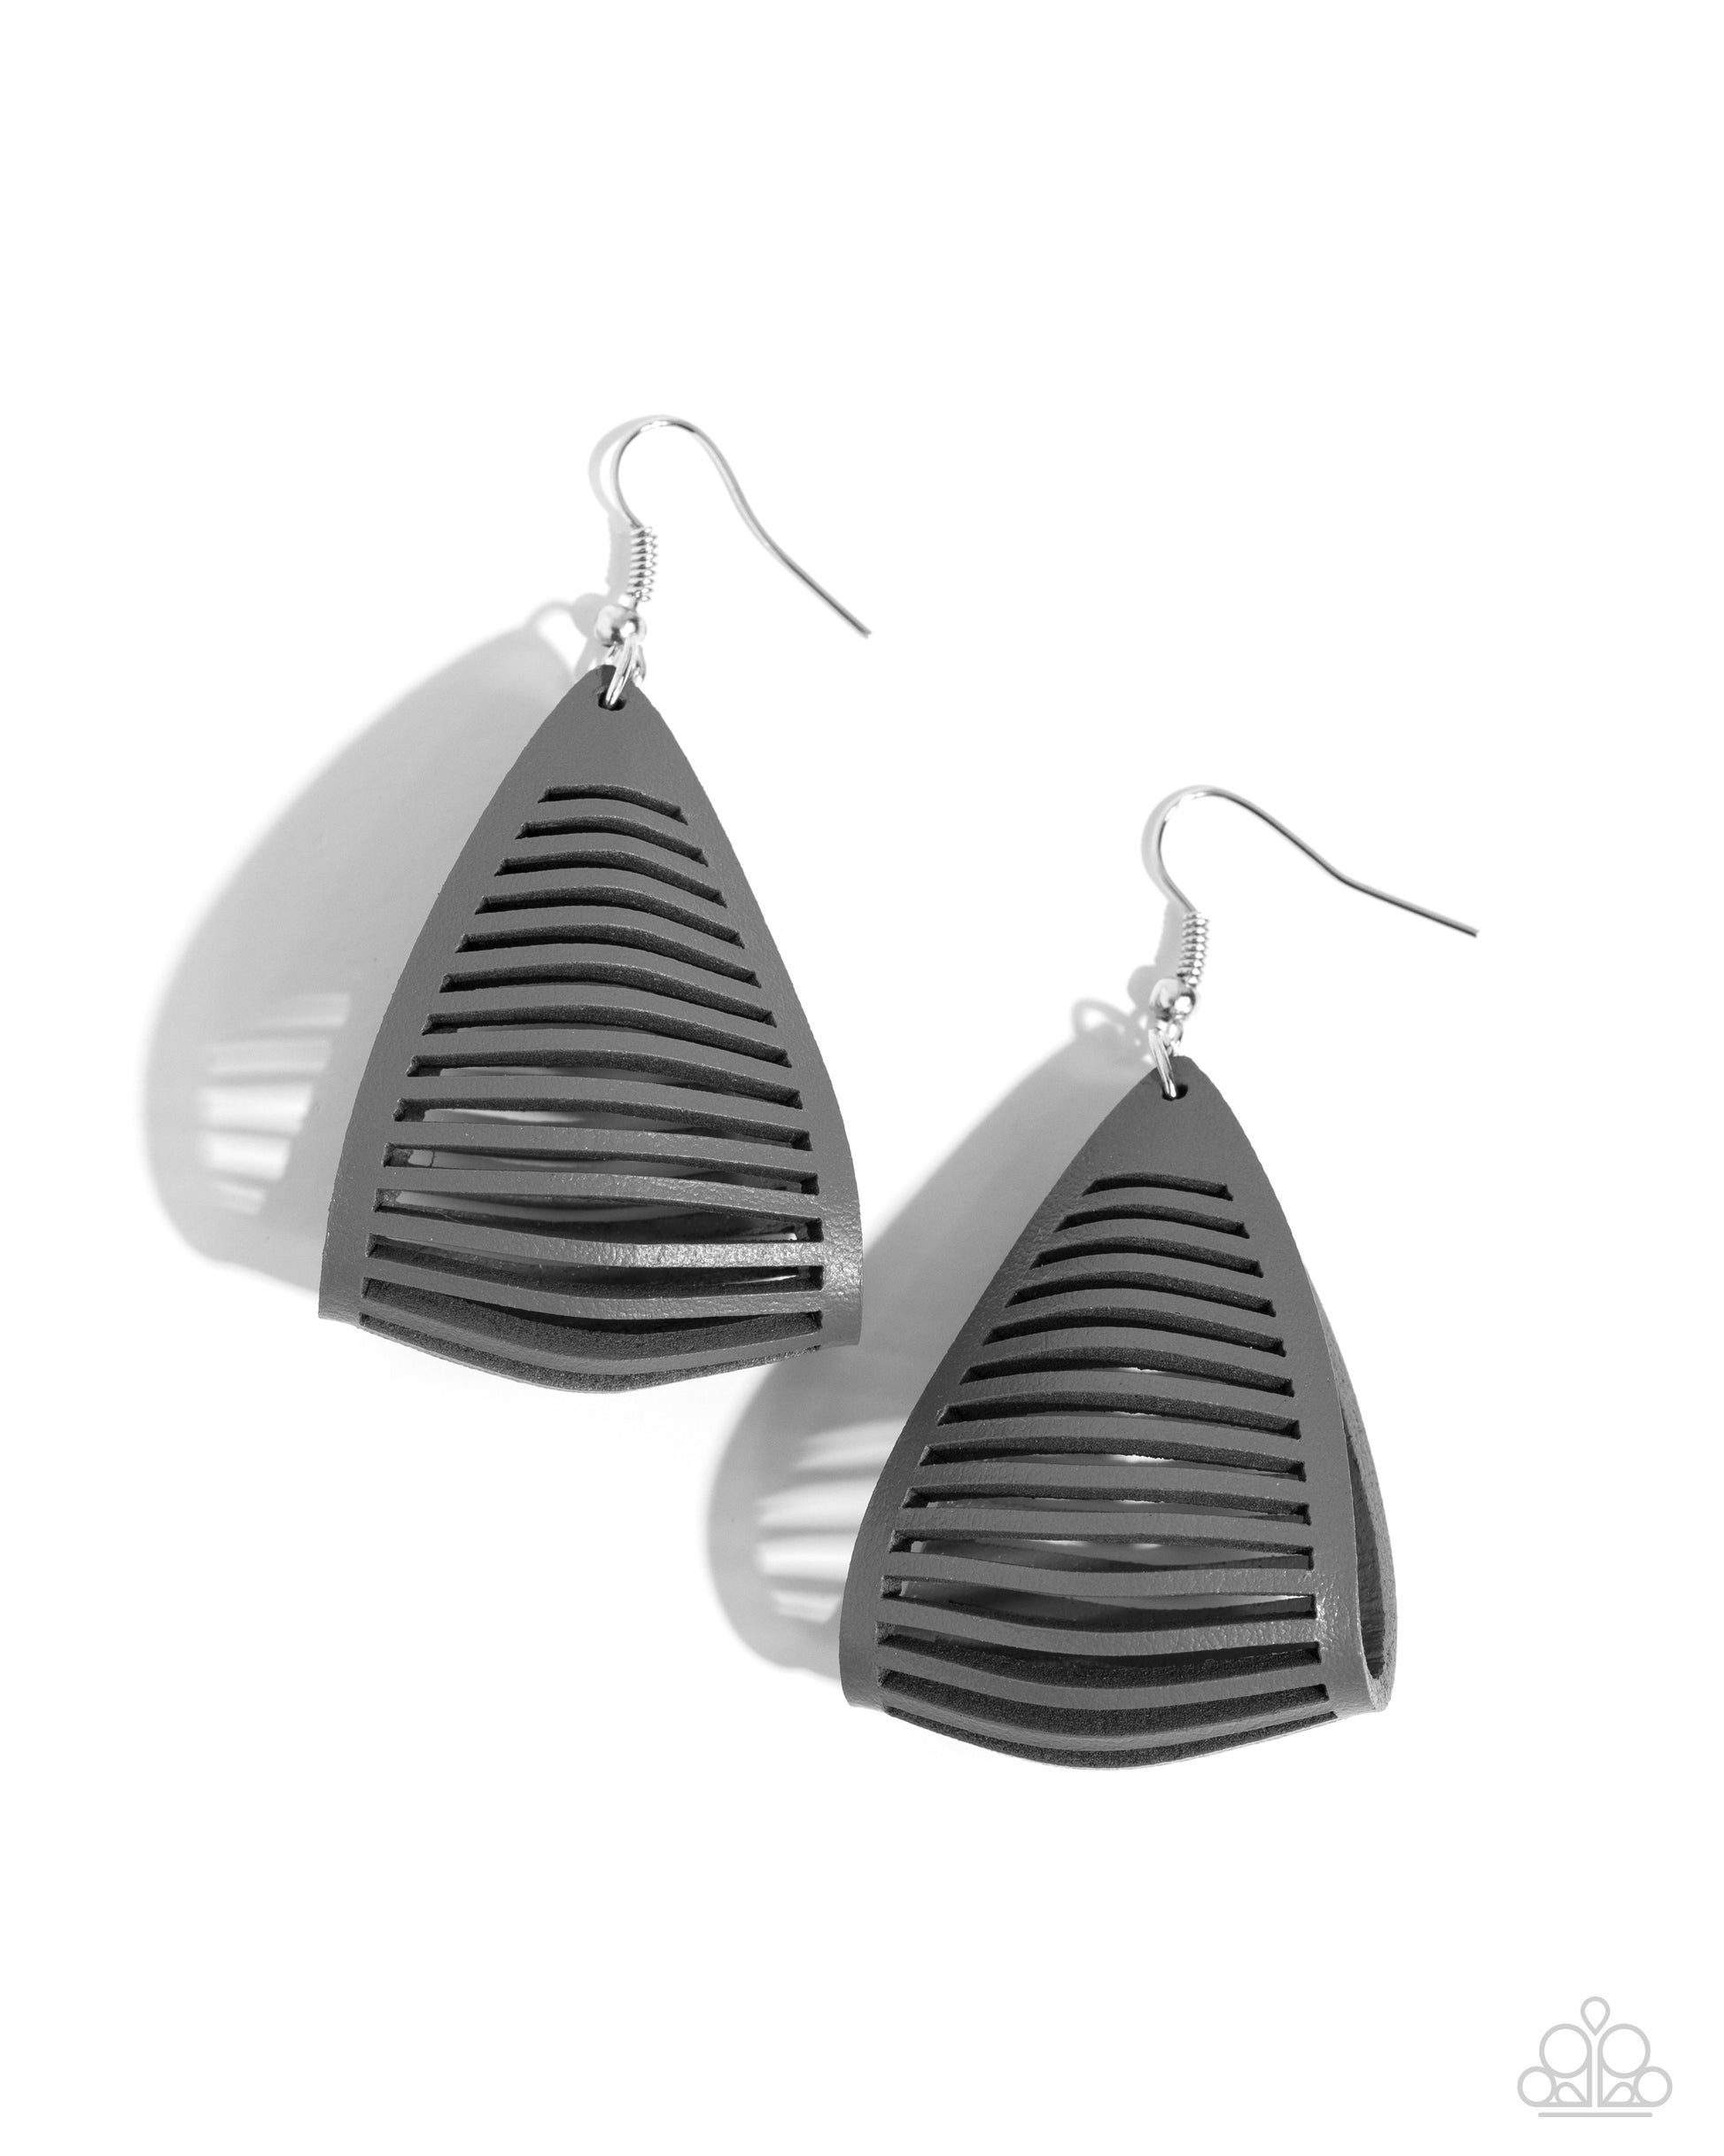 In and OUTBACK - silver - Paparazzi earrings